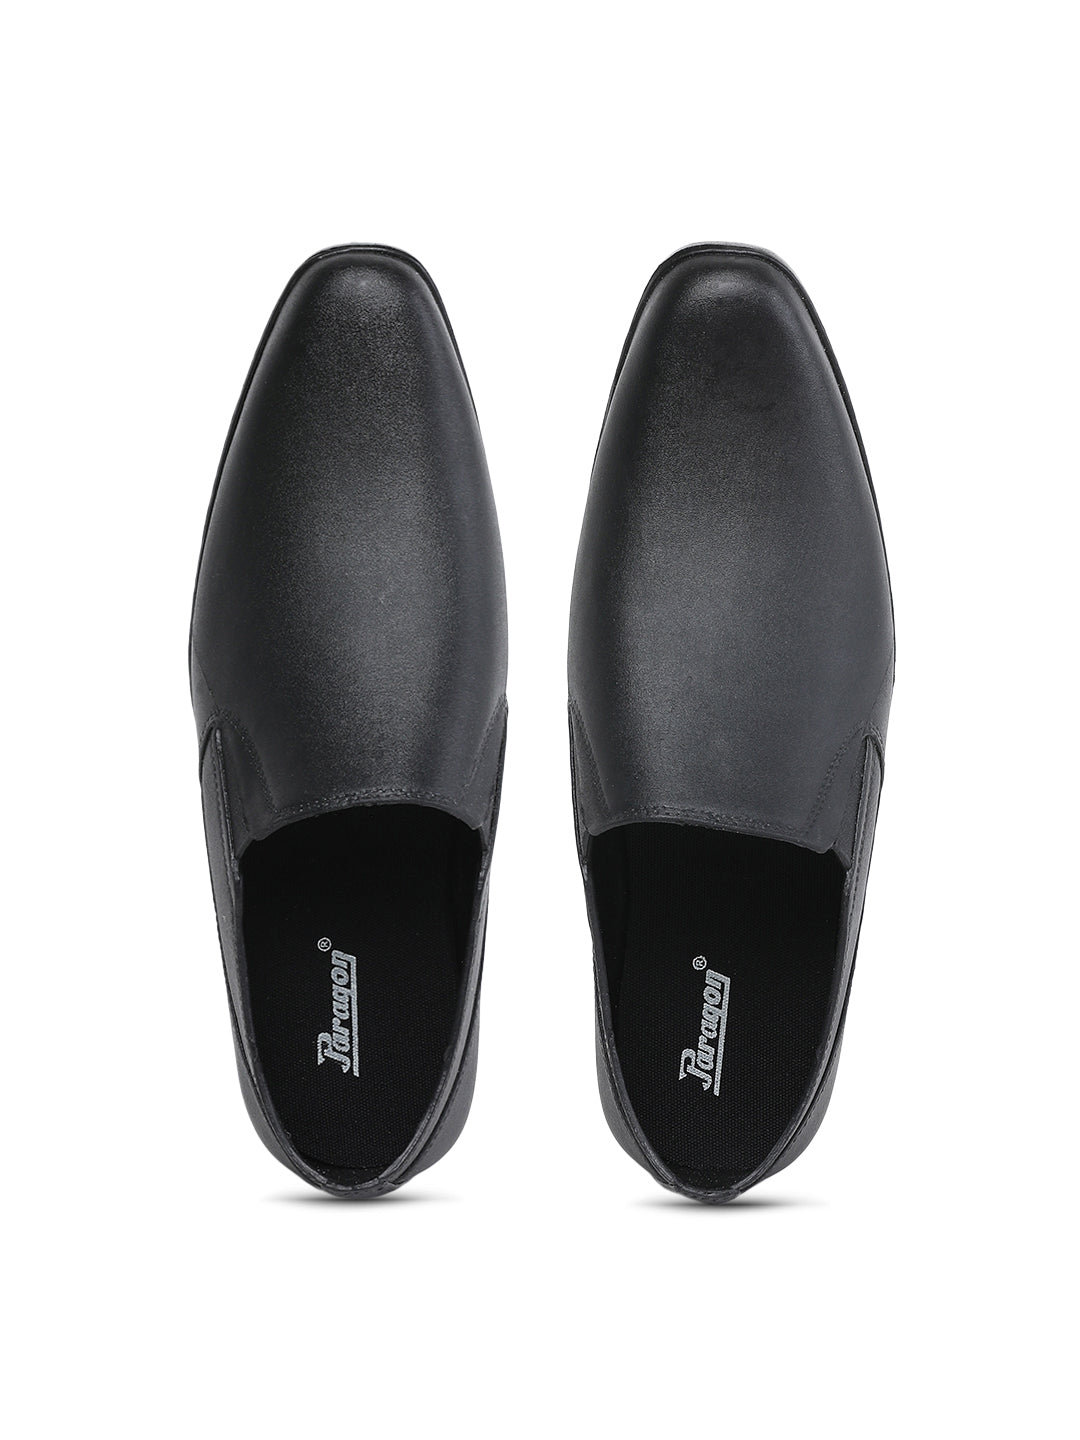 Paragon PV0343G Men Formal Shoes | Corporate Office Shoes | Smart &amp; Sleek Design | Comfortable Sole with Cushioning | Daily &amp; Occasion Wear